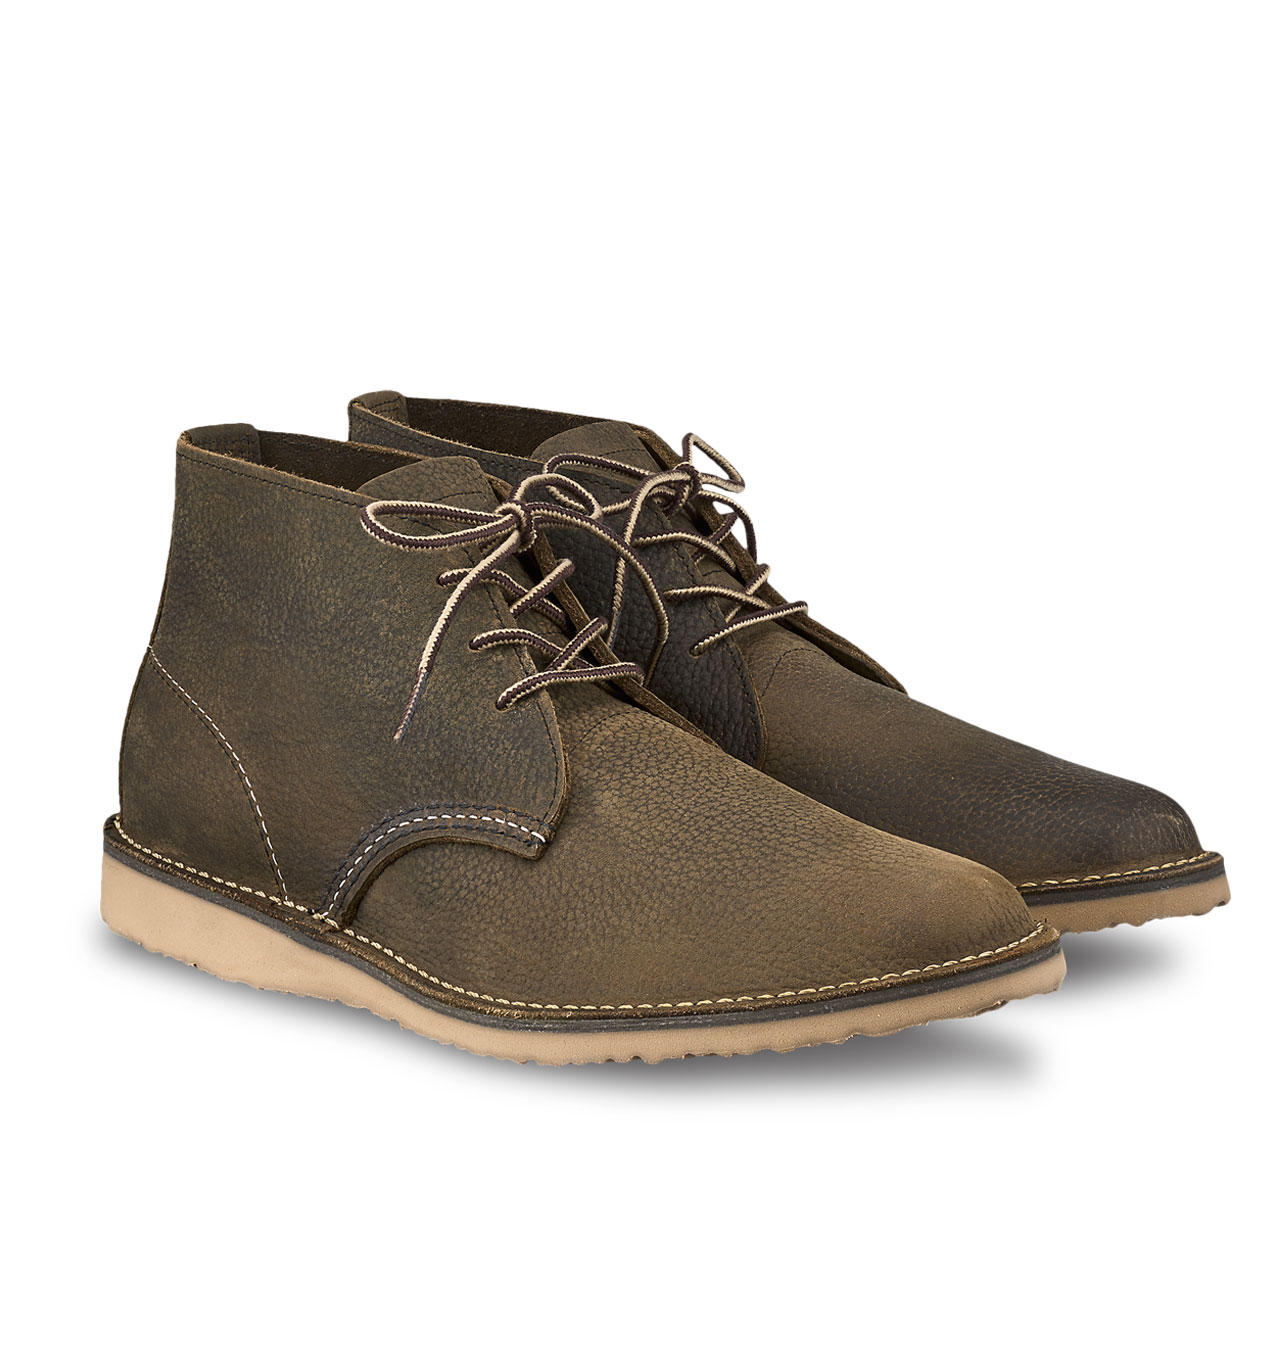 Red Wing Shoes 3327 - Weekender Chukka 